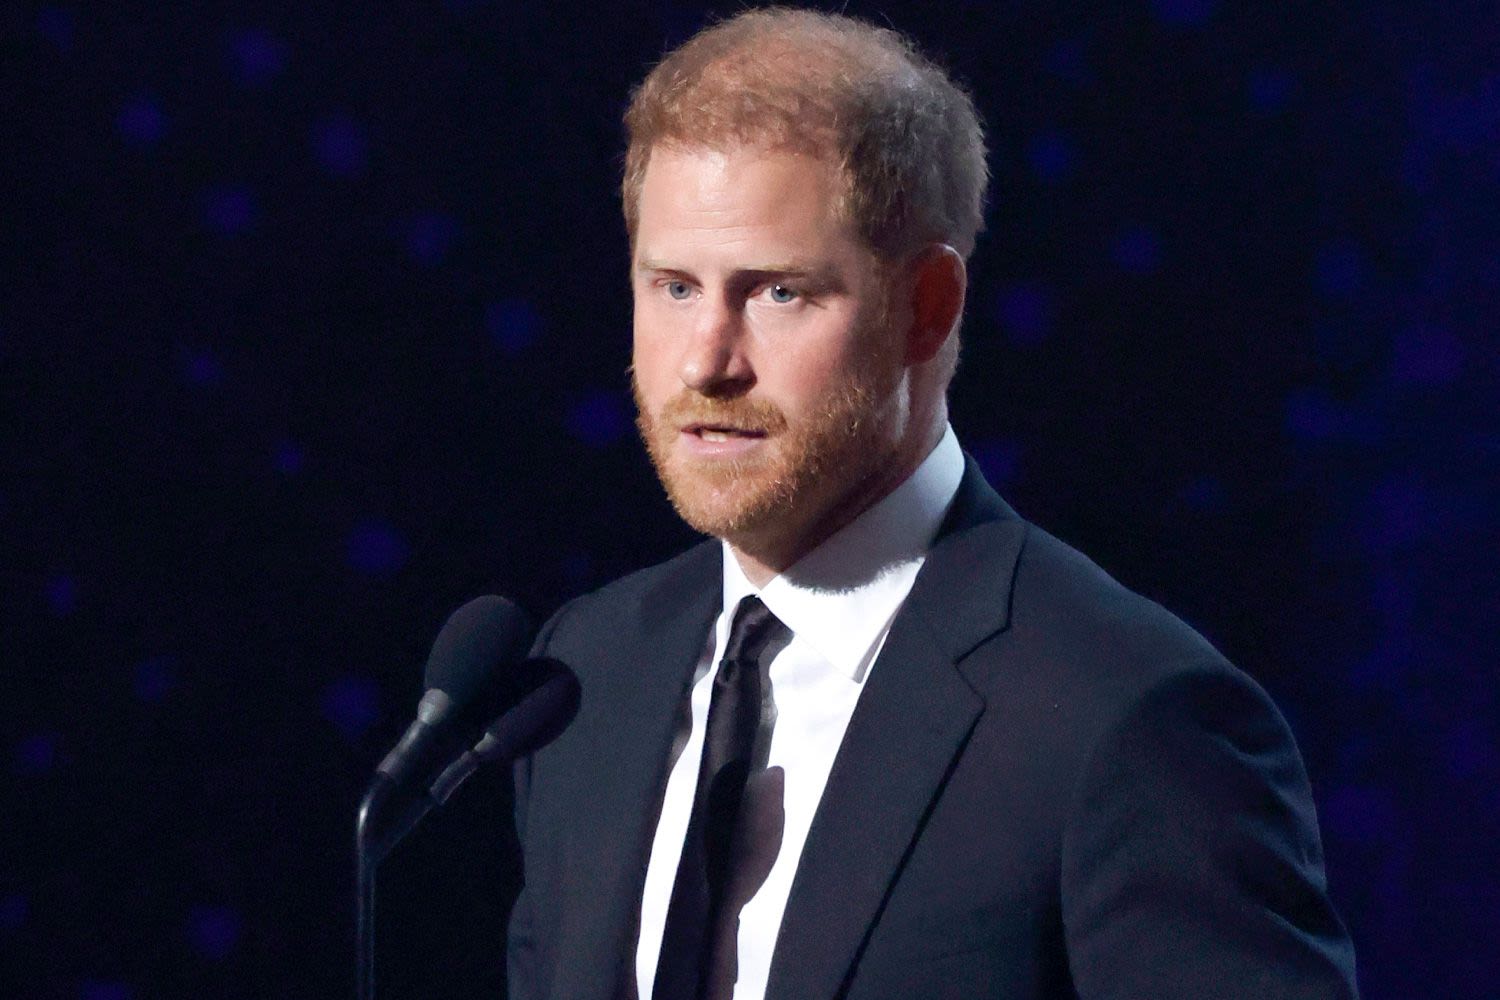 Prince Harry Addresses Pat Tillman's Mom in Powerful ESPYs Speech After Controversy